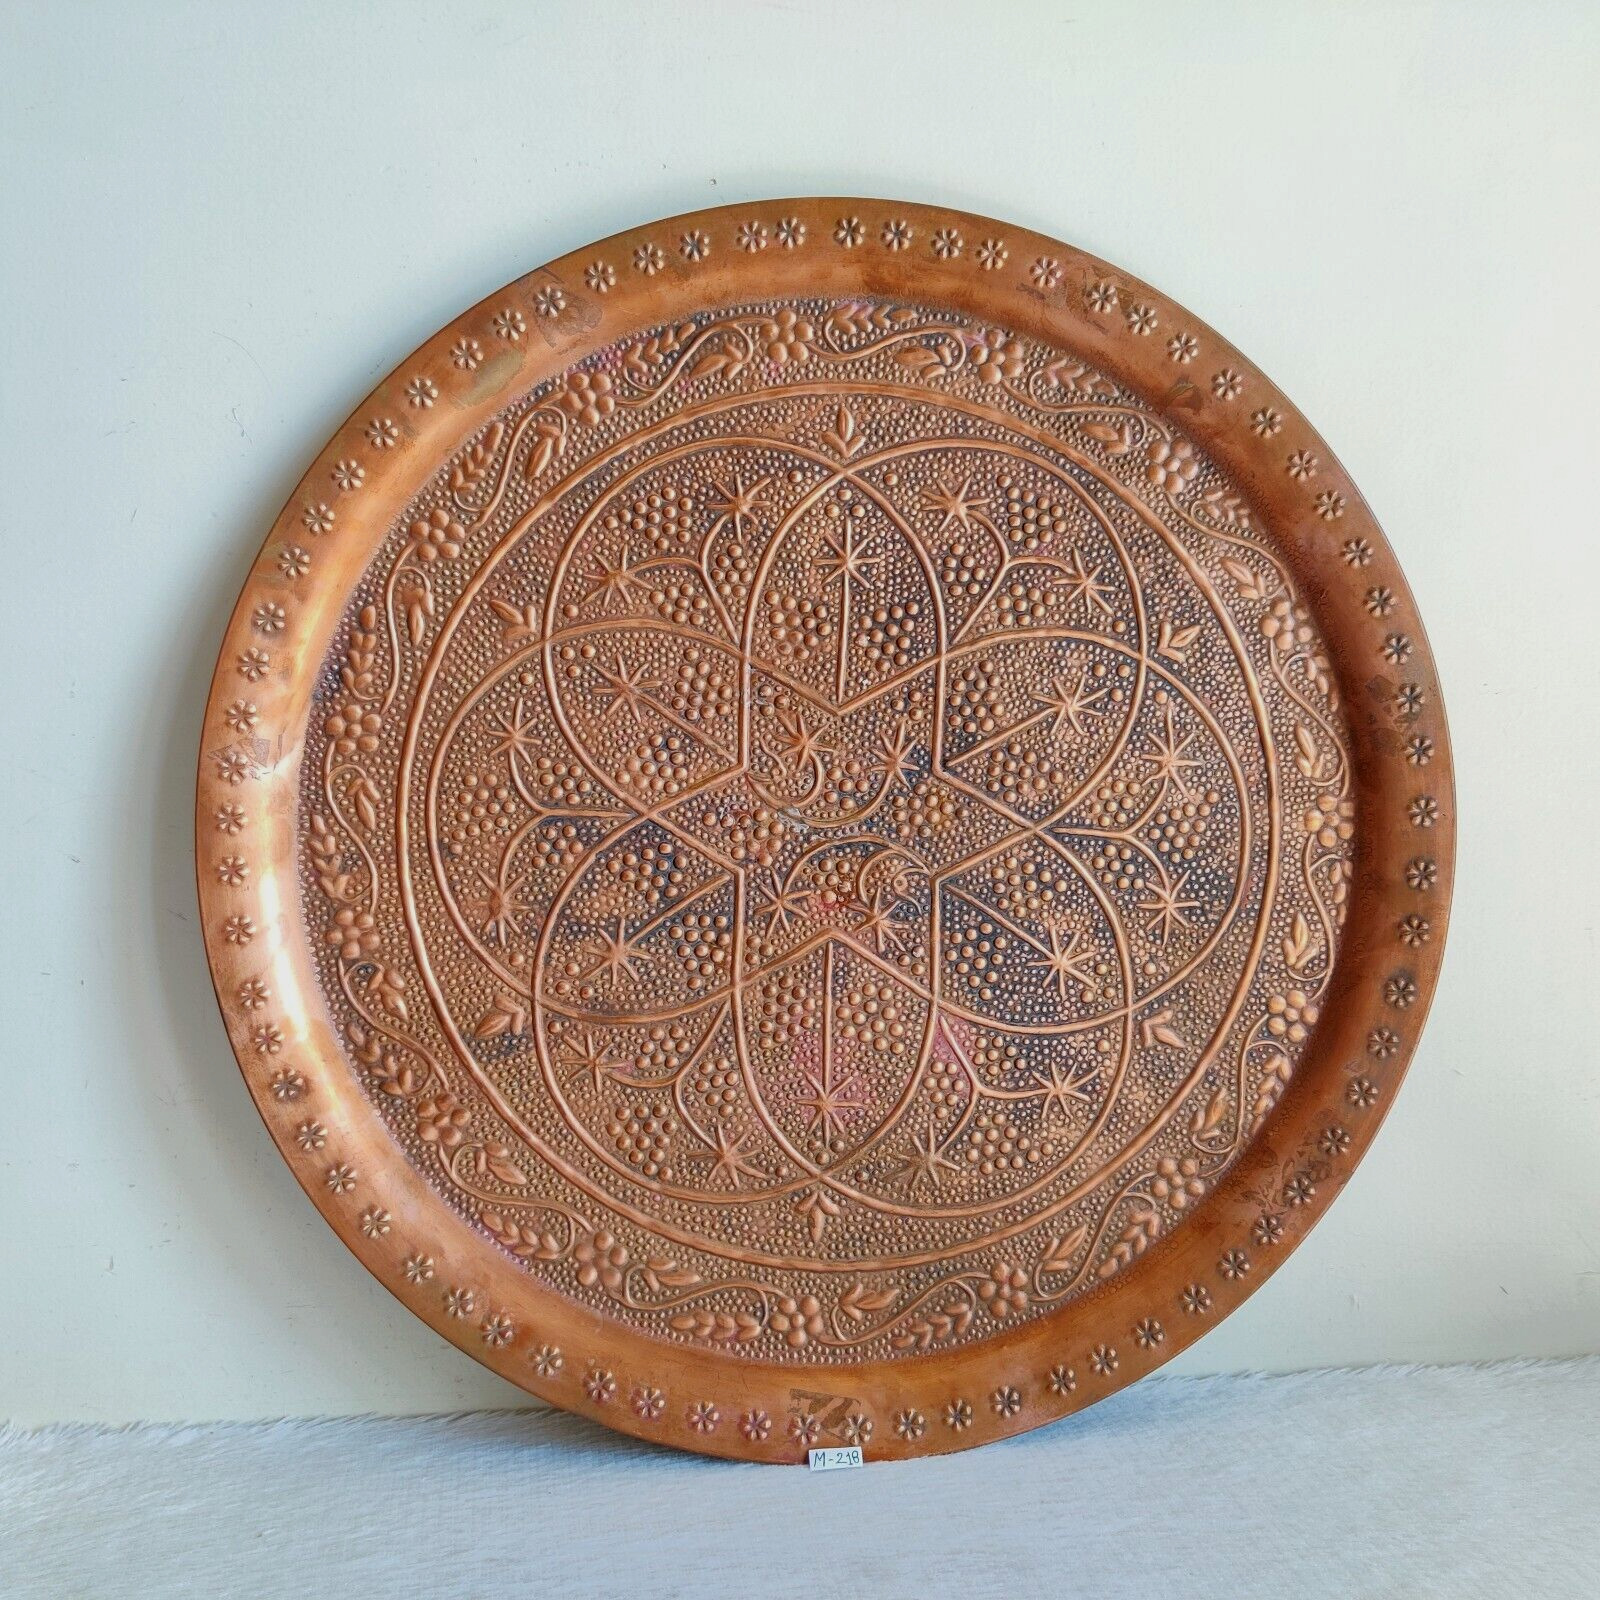 19c Antique Mandala Engraved Copper Plate Rare Collectible Kitchenware Old M218